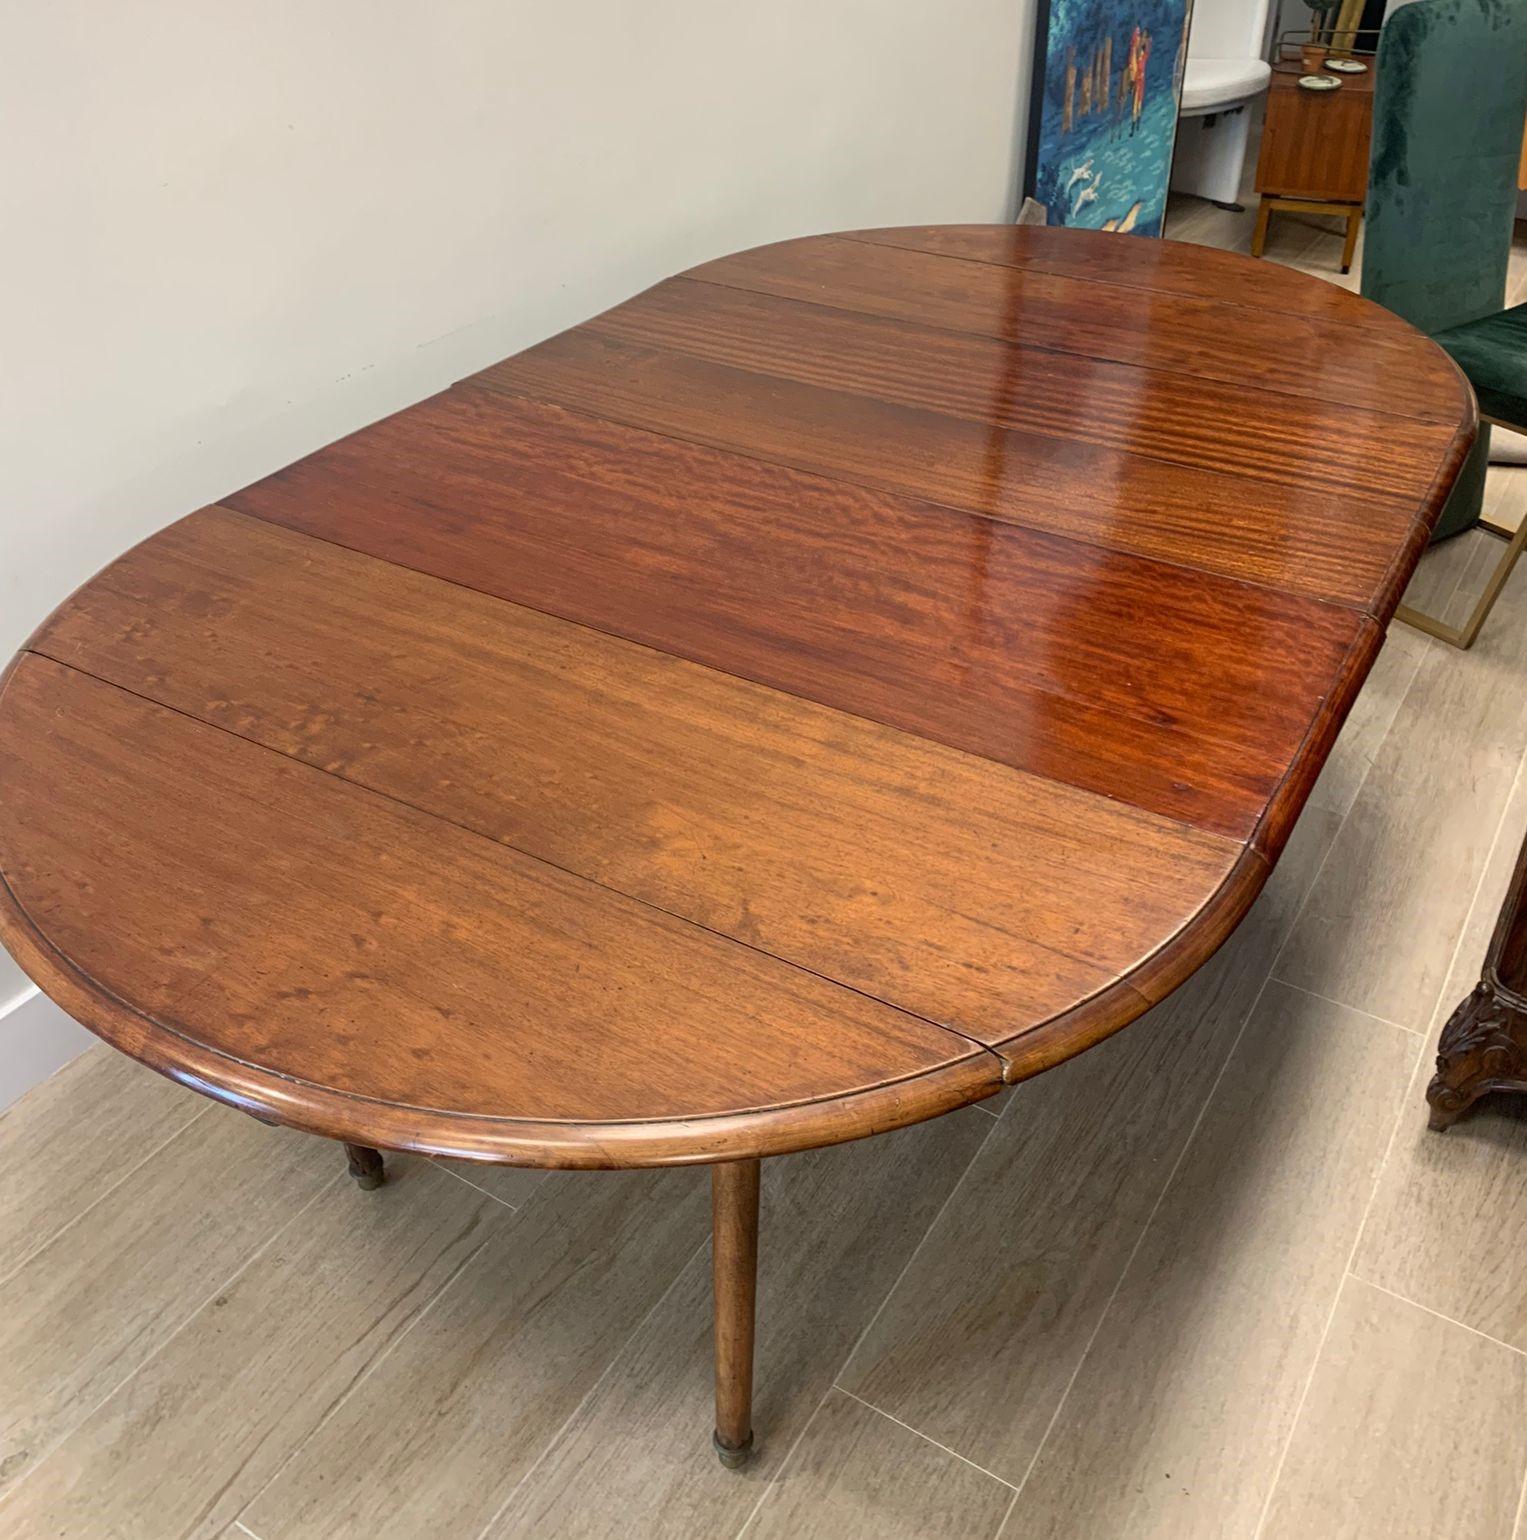 Amazing Dining table made with mahogany wood. This pembroke table is made up of a rectangular top, two semicircular wings that extend through sliding wooden slats, and six legs with wheels that make it easy to move.

The Pembroke table has its